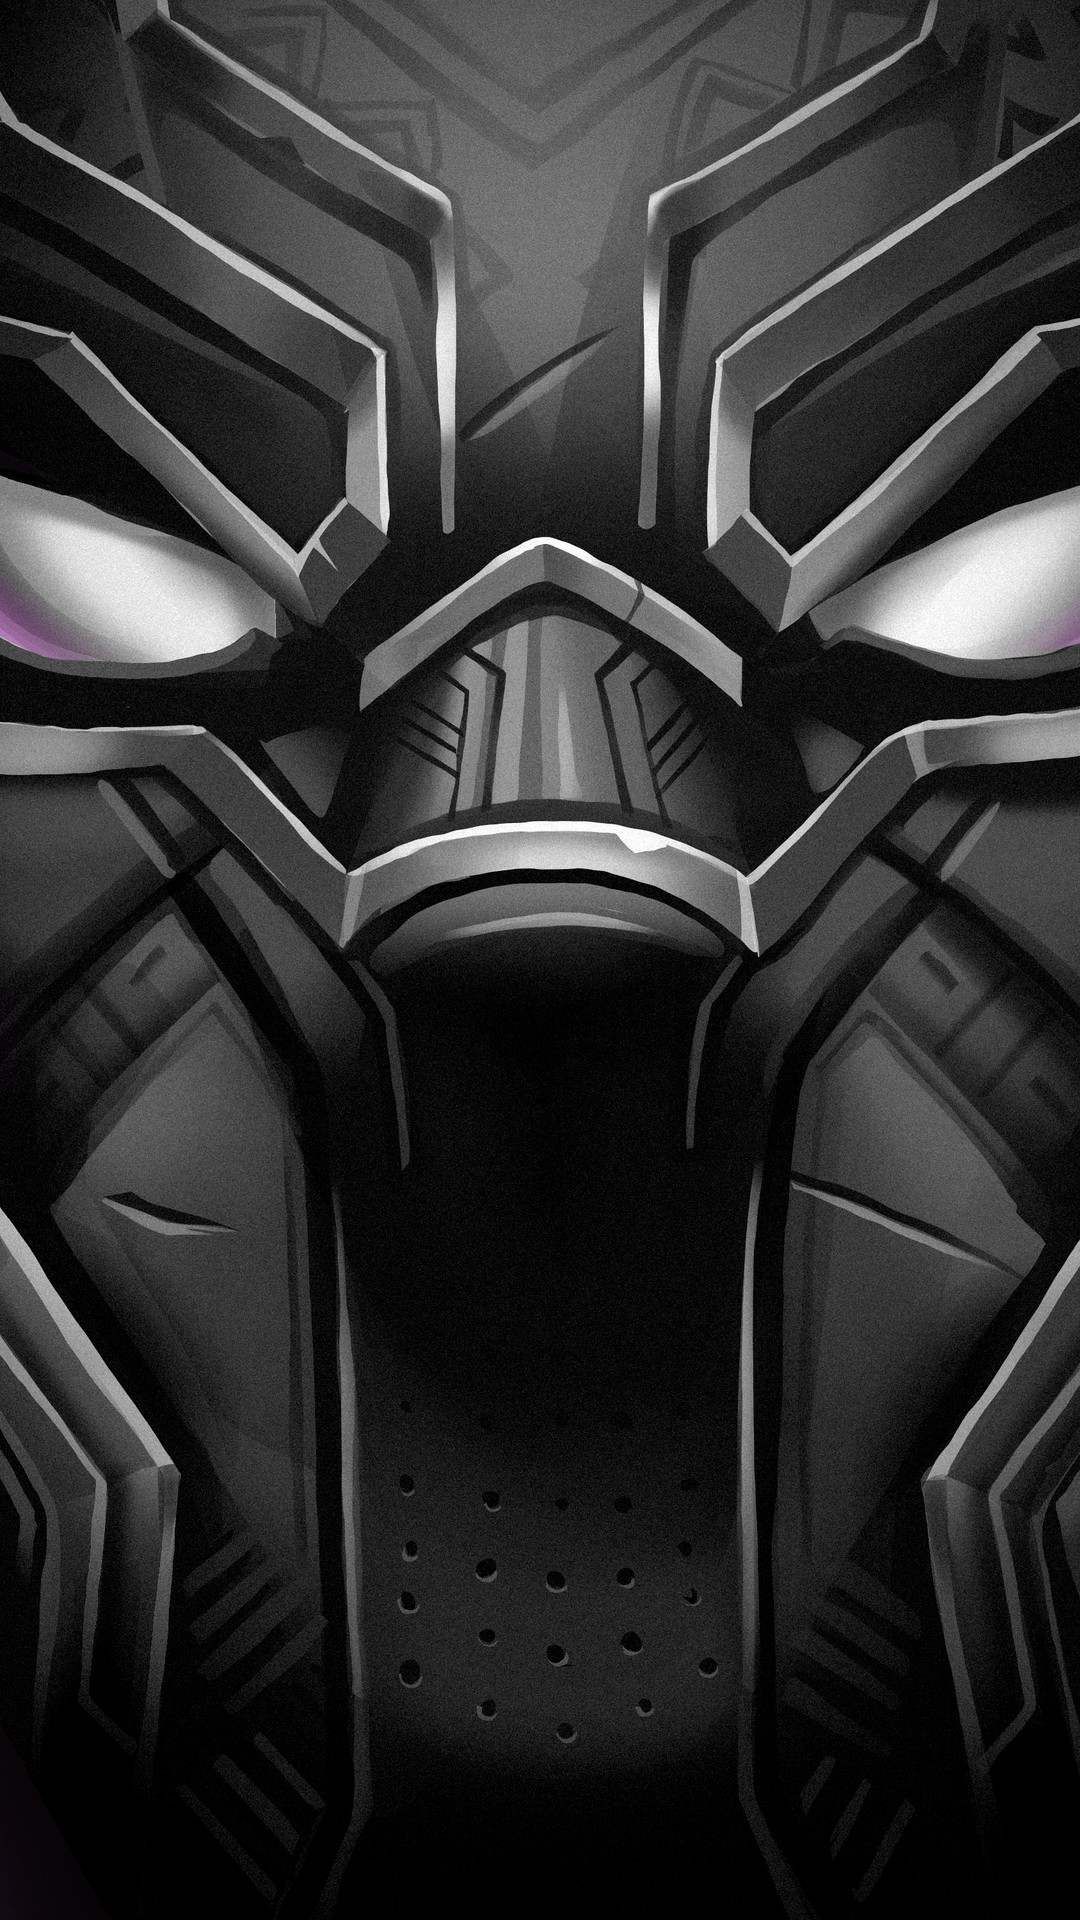 Black Panther Face Images Wallpapers